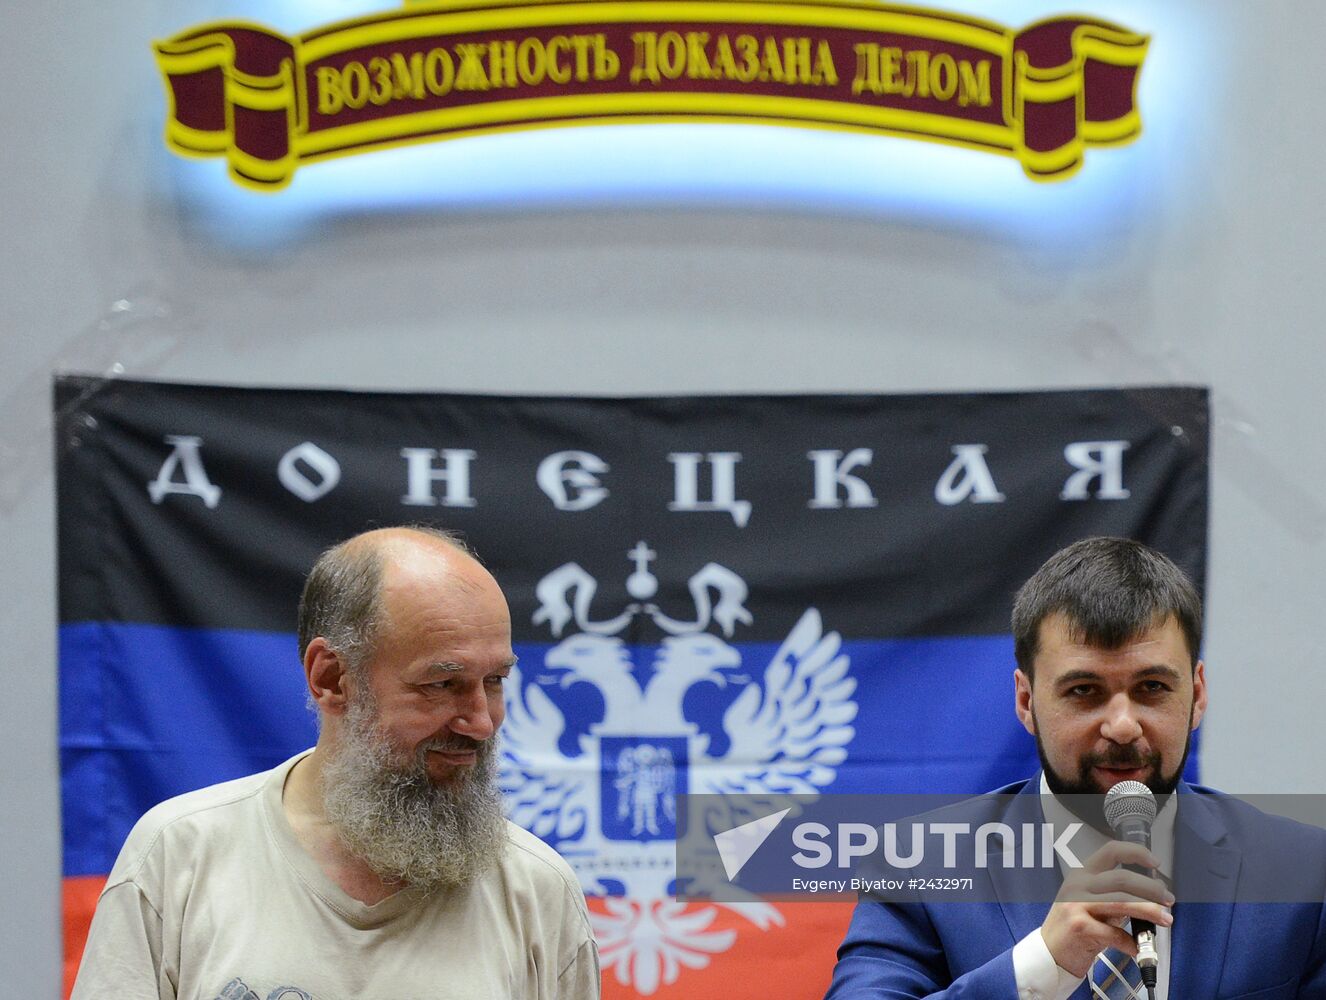 Meeting of Donetsk People's Republic Supreme Council